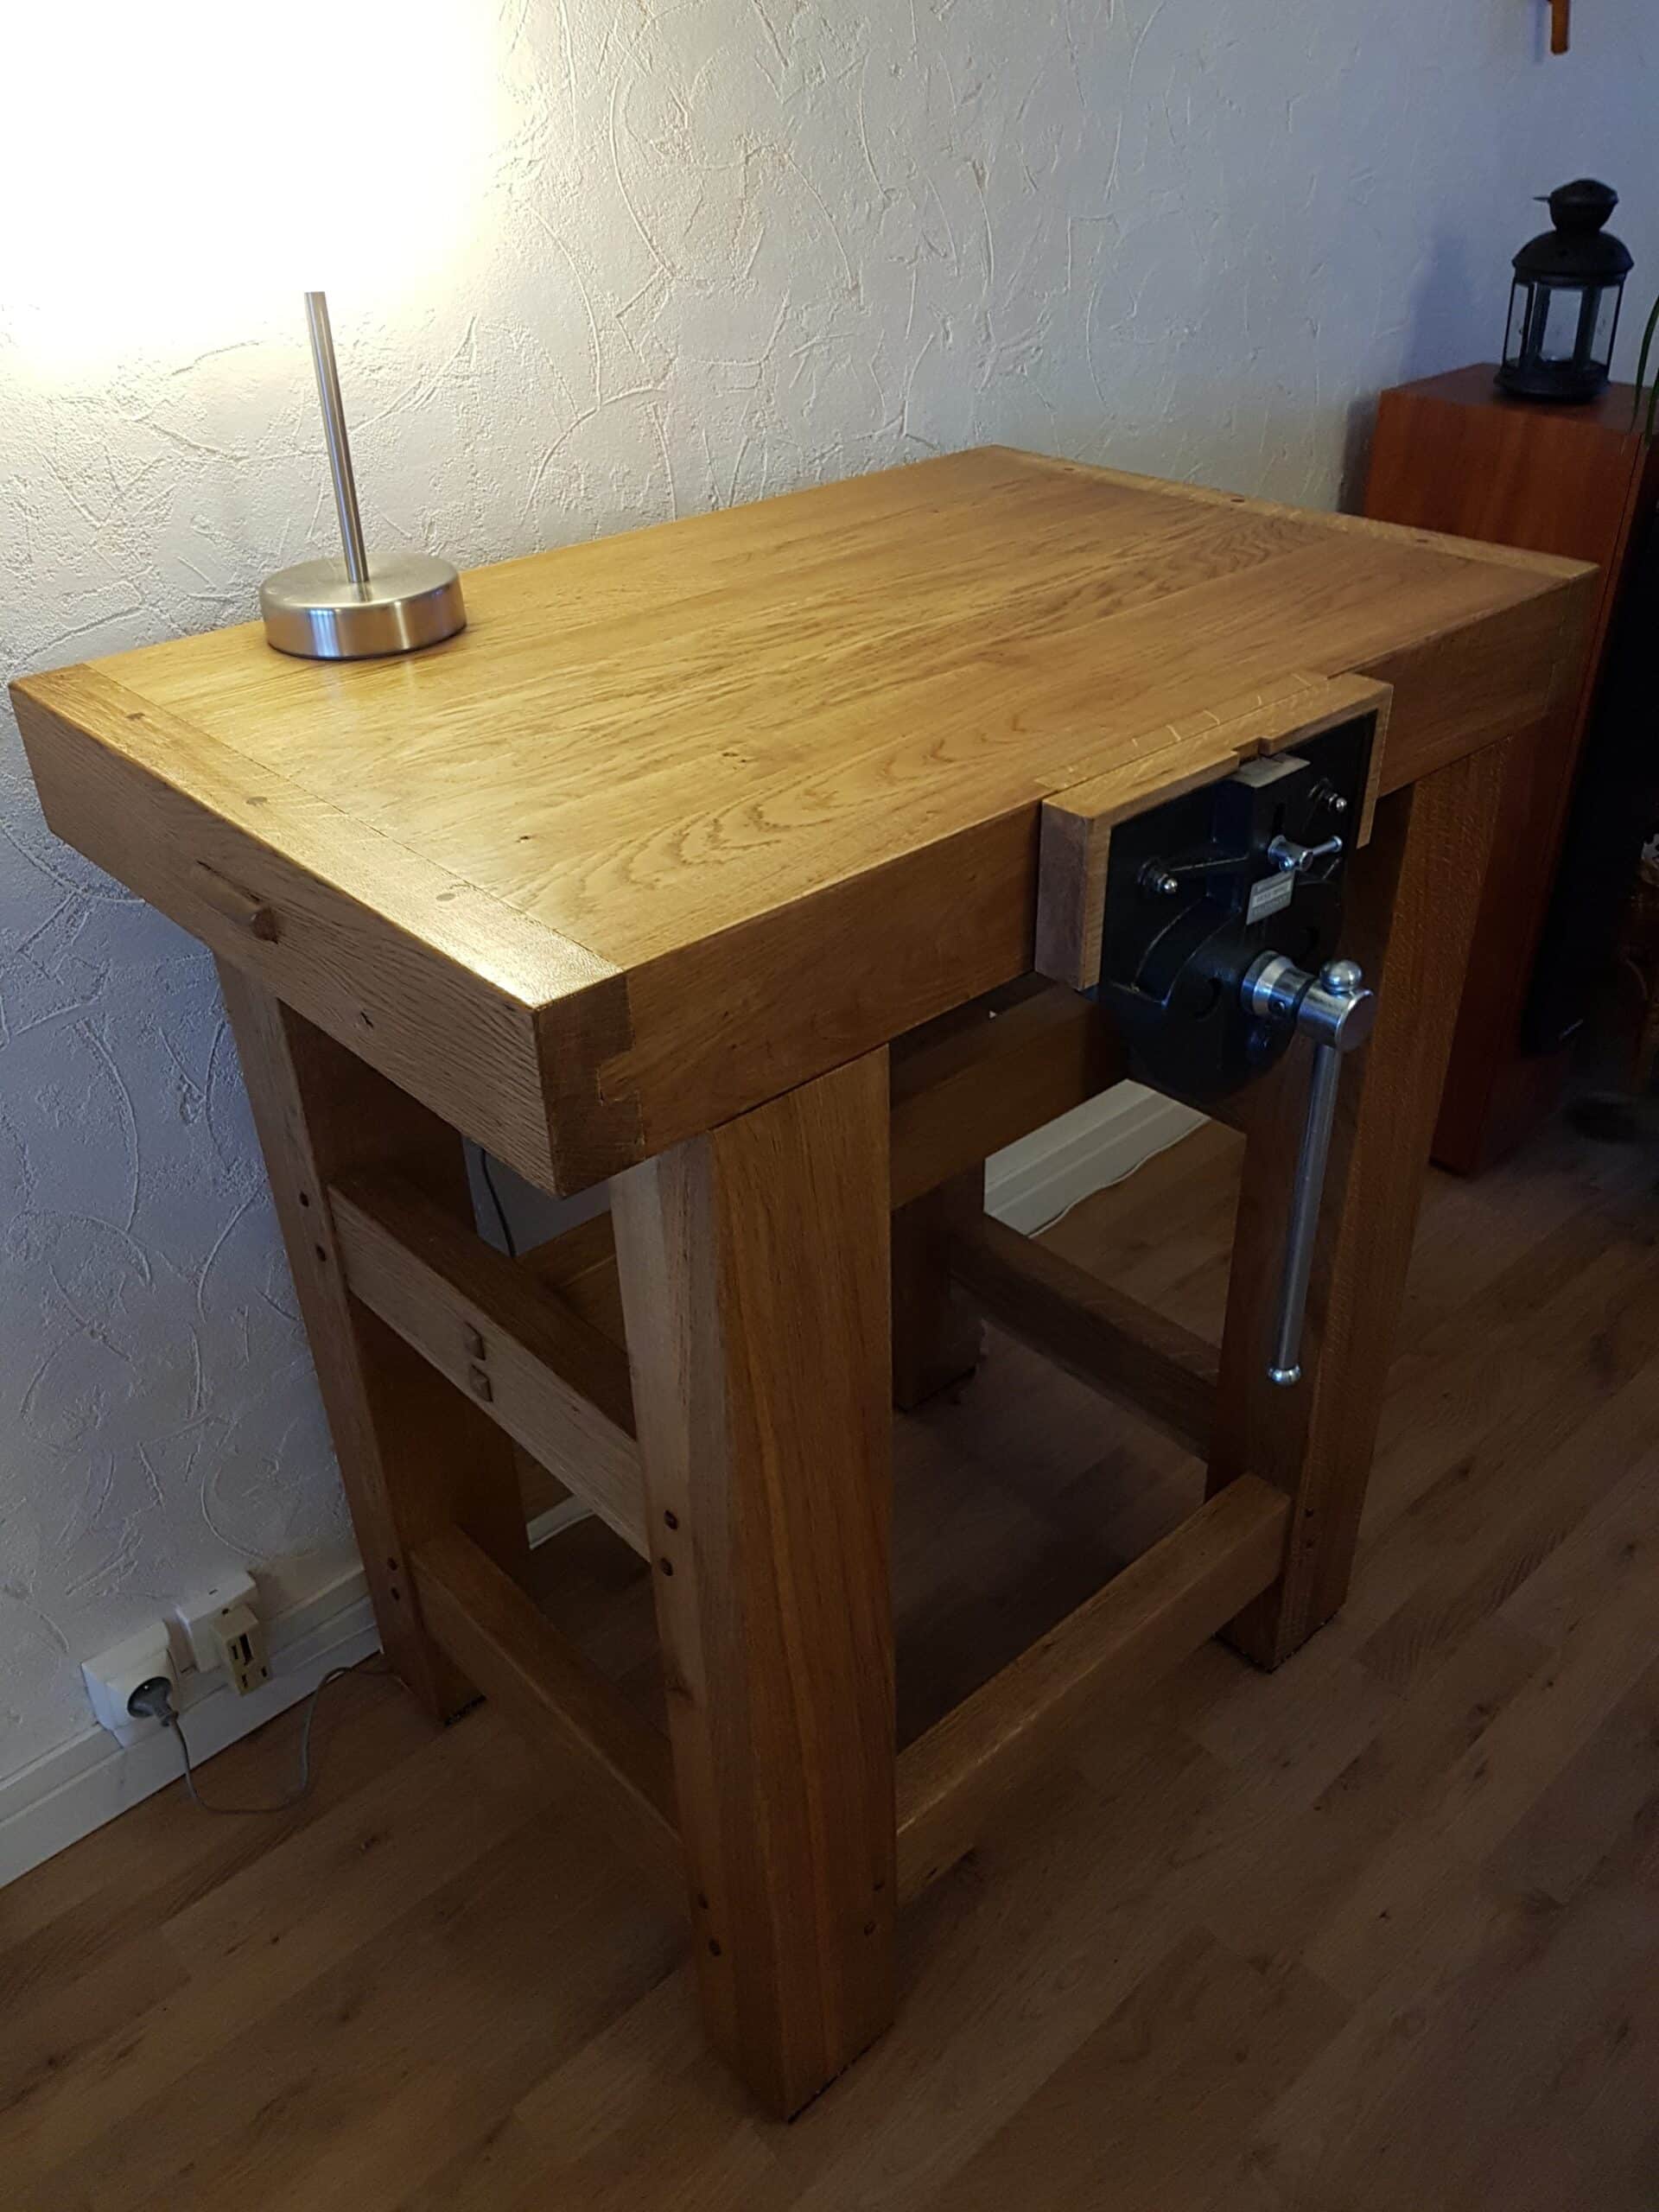 Foot stool from offcuts  The Woodworker - Home of Get Woodworking